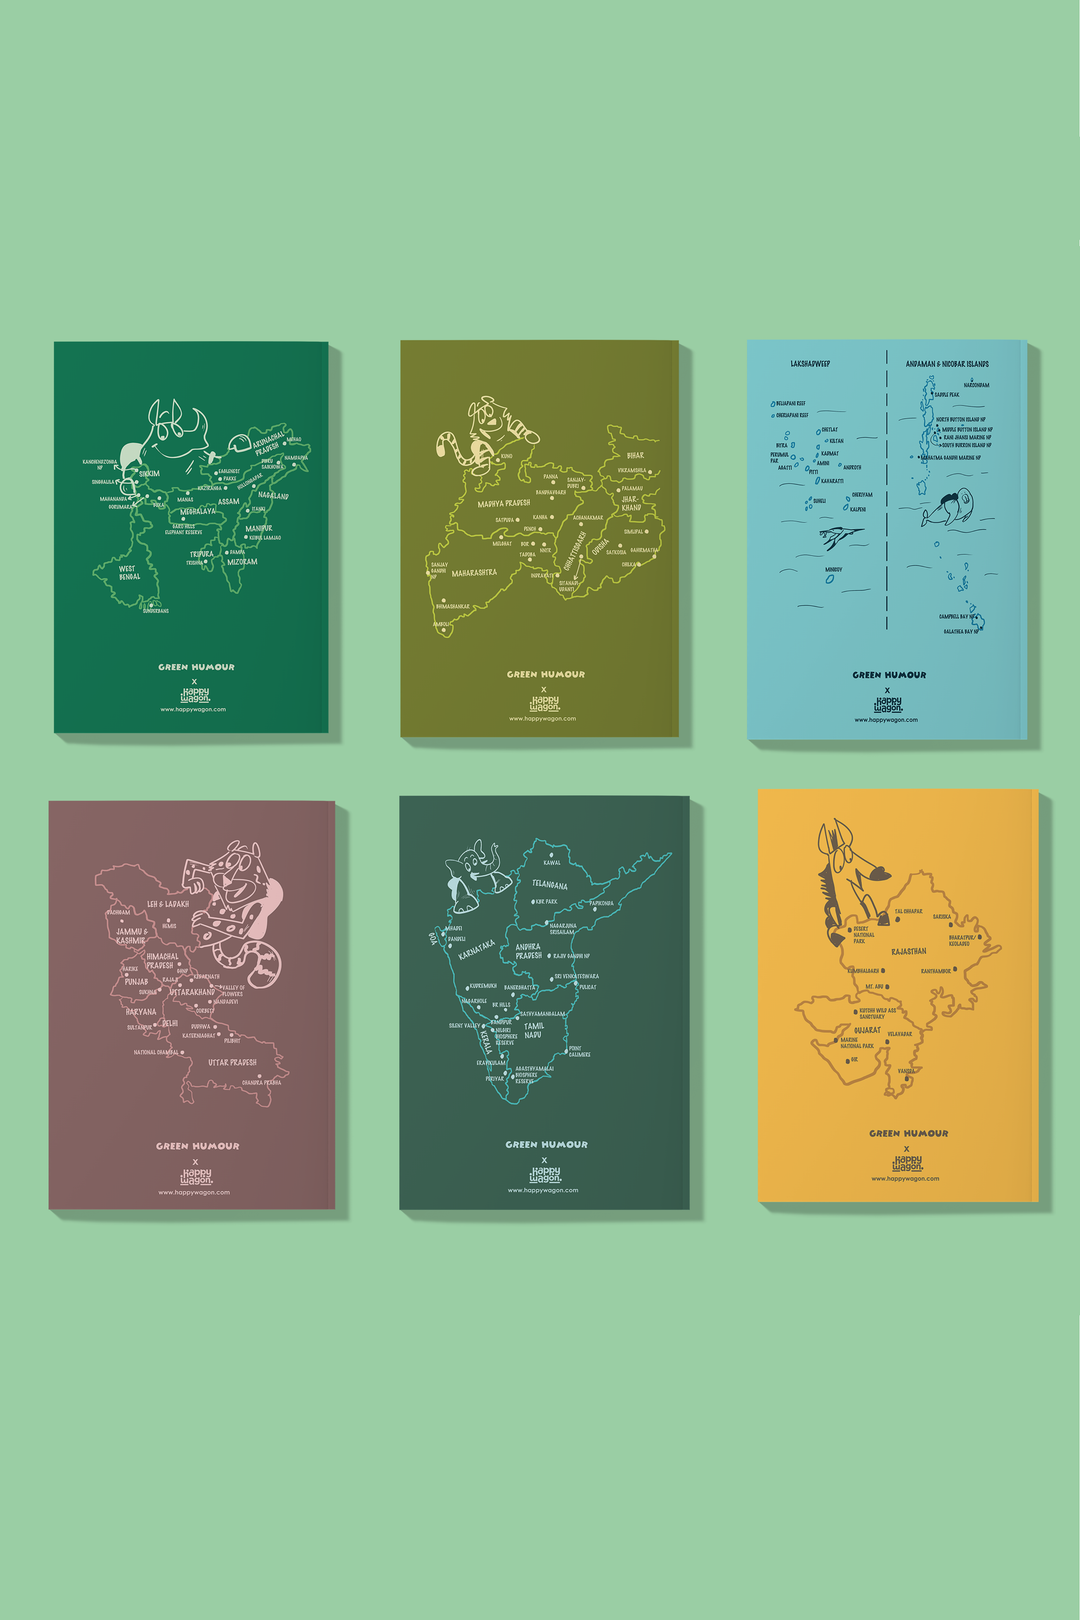 Naturalist’s Field Notebooks| Set of 6 with Sticker Sheets